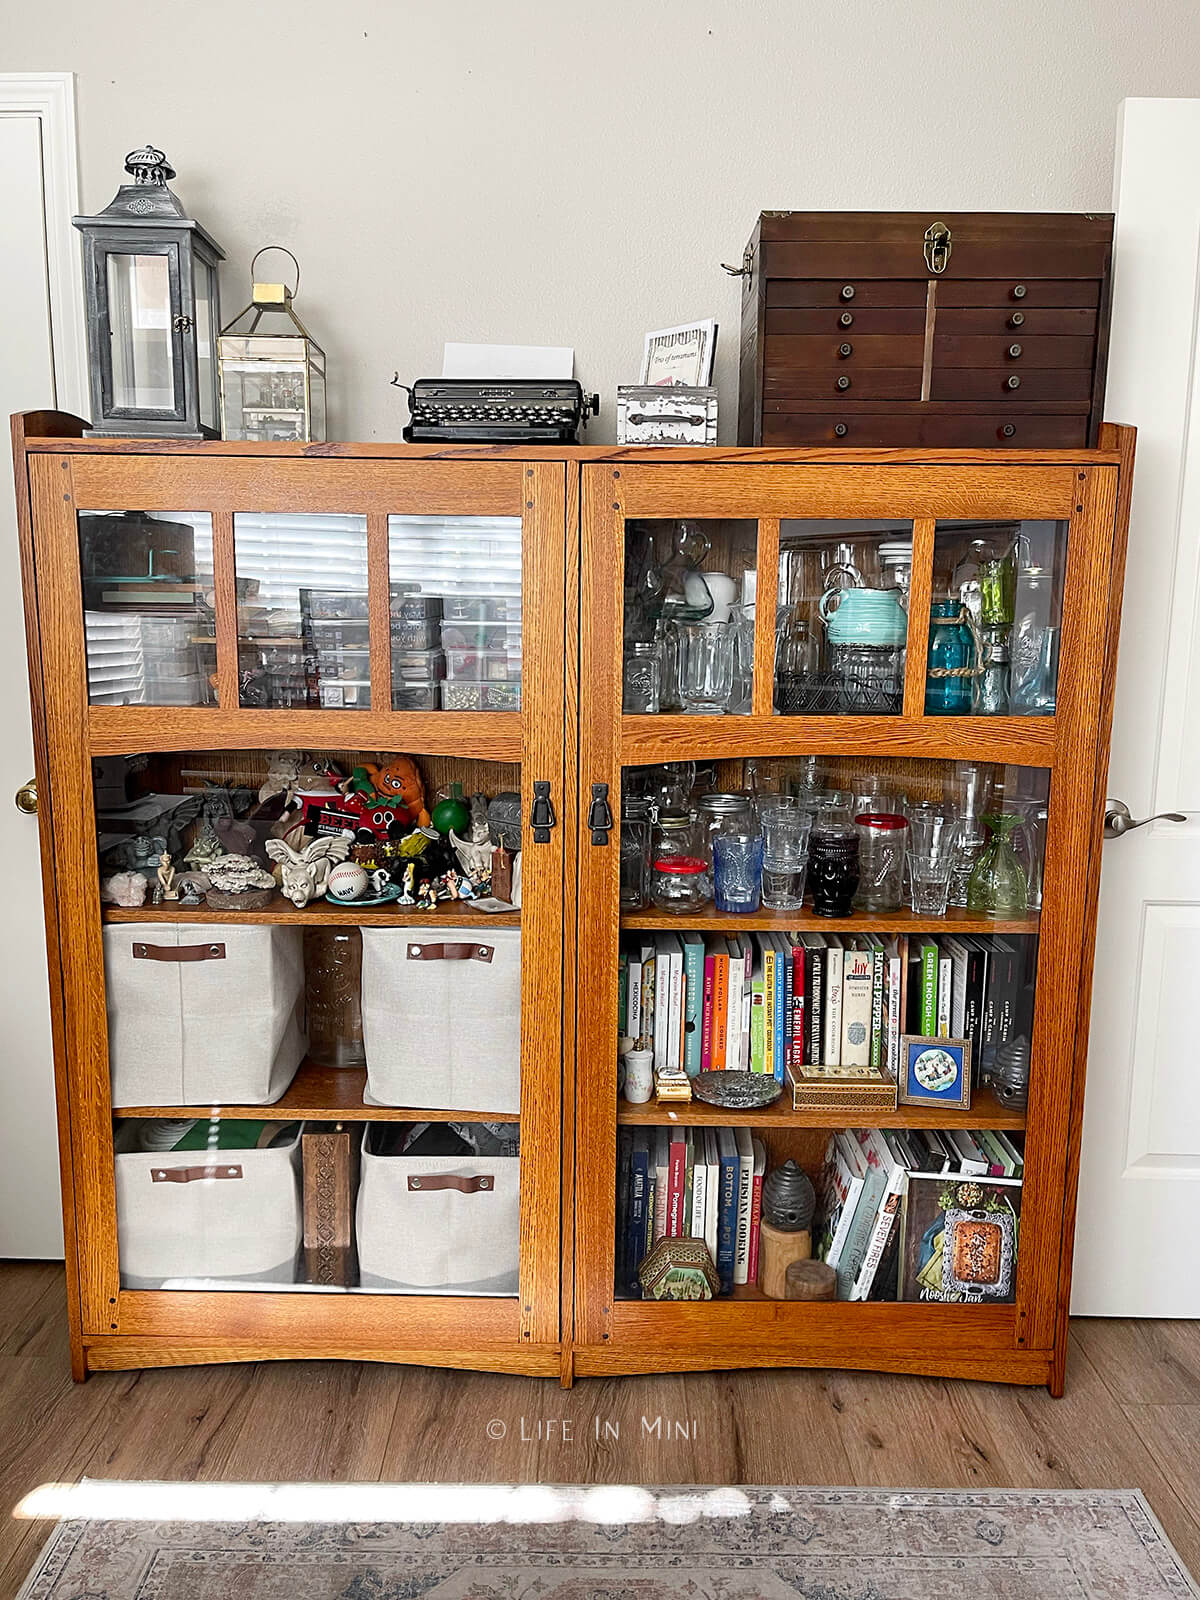 A wooden mission style cabinet with glass doors and art supplies organized in it